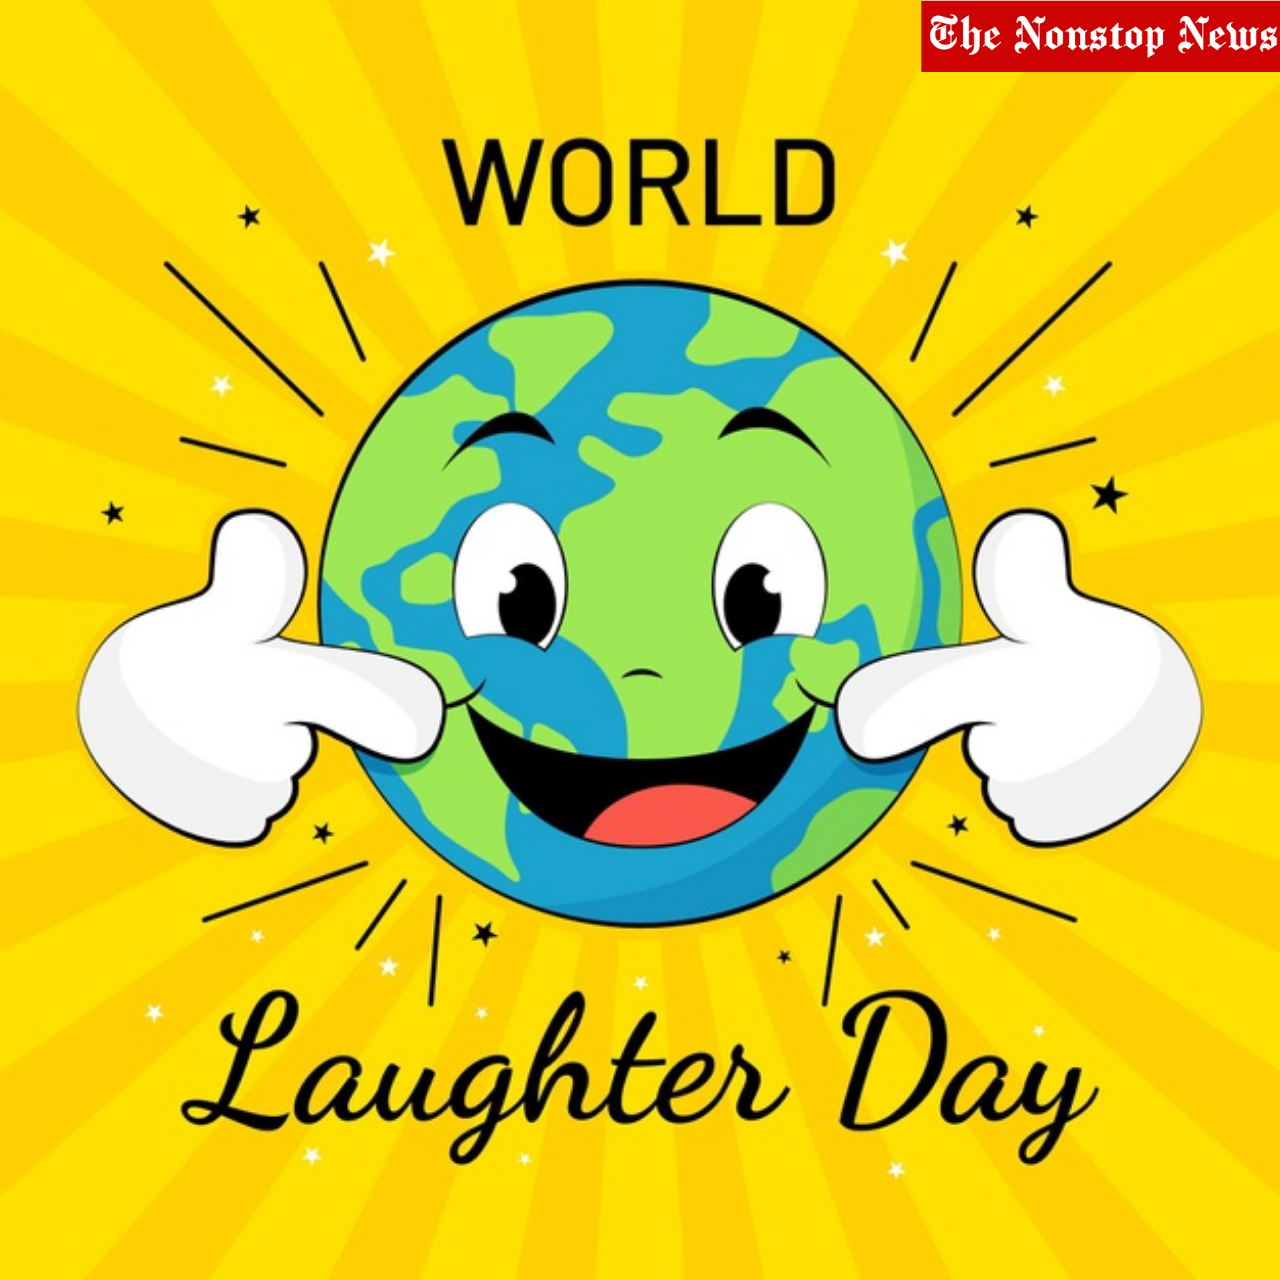 Happy World Laughter Day 2021 Wishes, WhatsApp Status Messages, Quotes, Jokes and Images to Share)